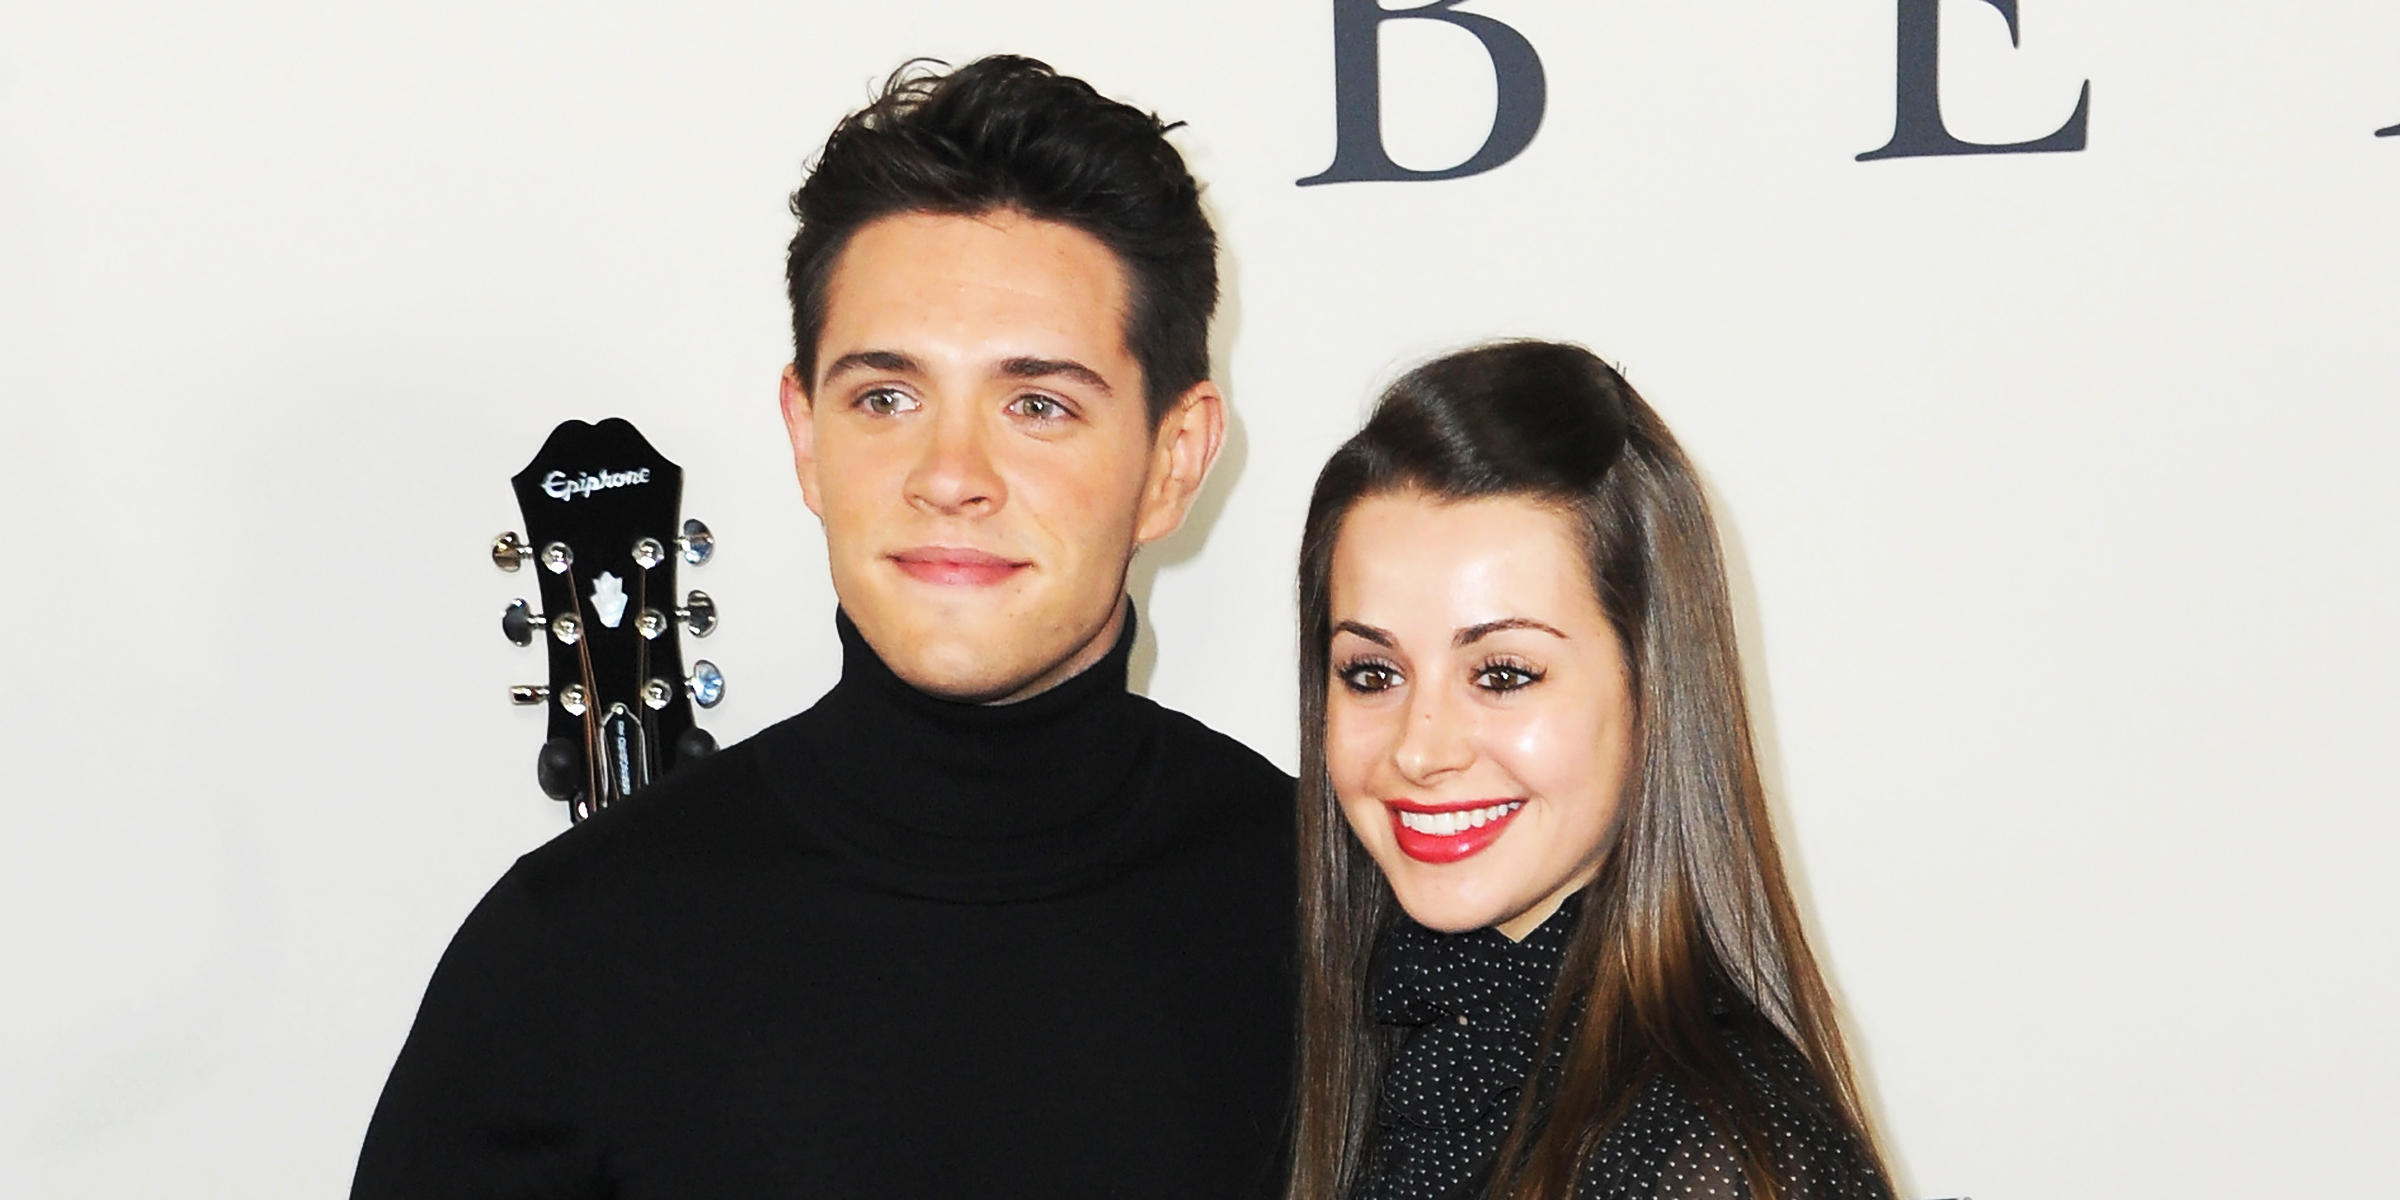 Casey Cott and Nichola Basara | Source: Getty Images